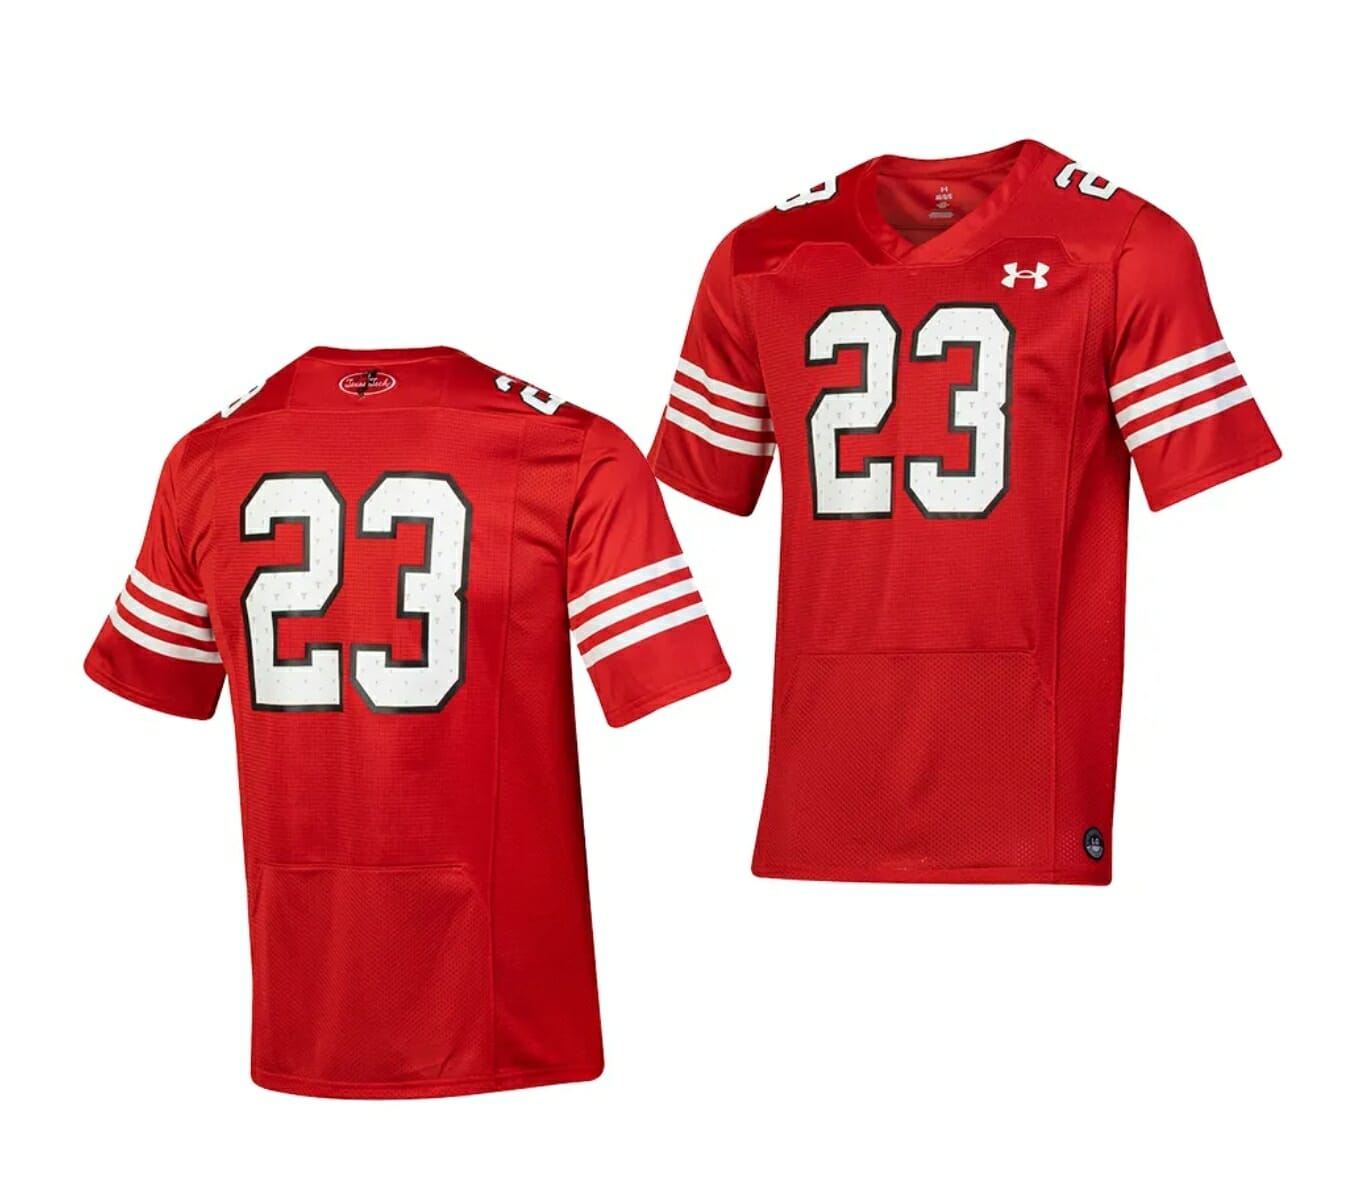 NCAA Football Jersey Texas Tech Red Raiders #23 College Throwback Stitched